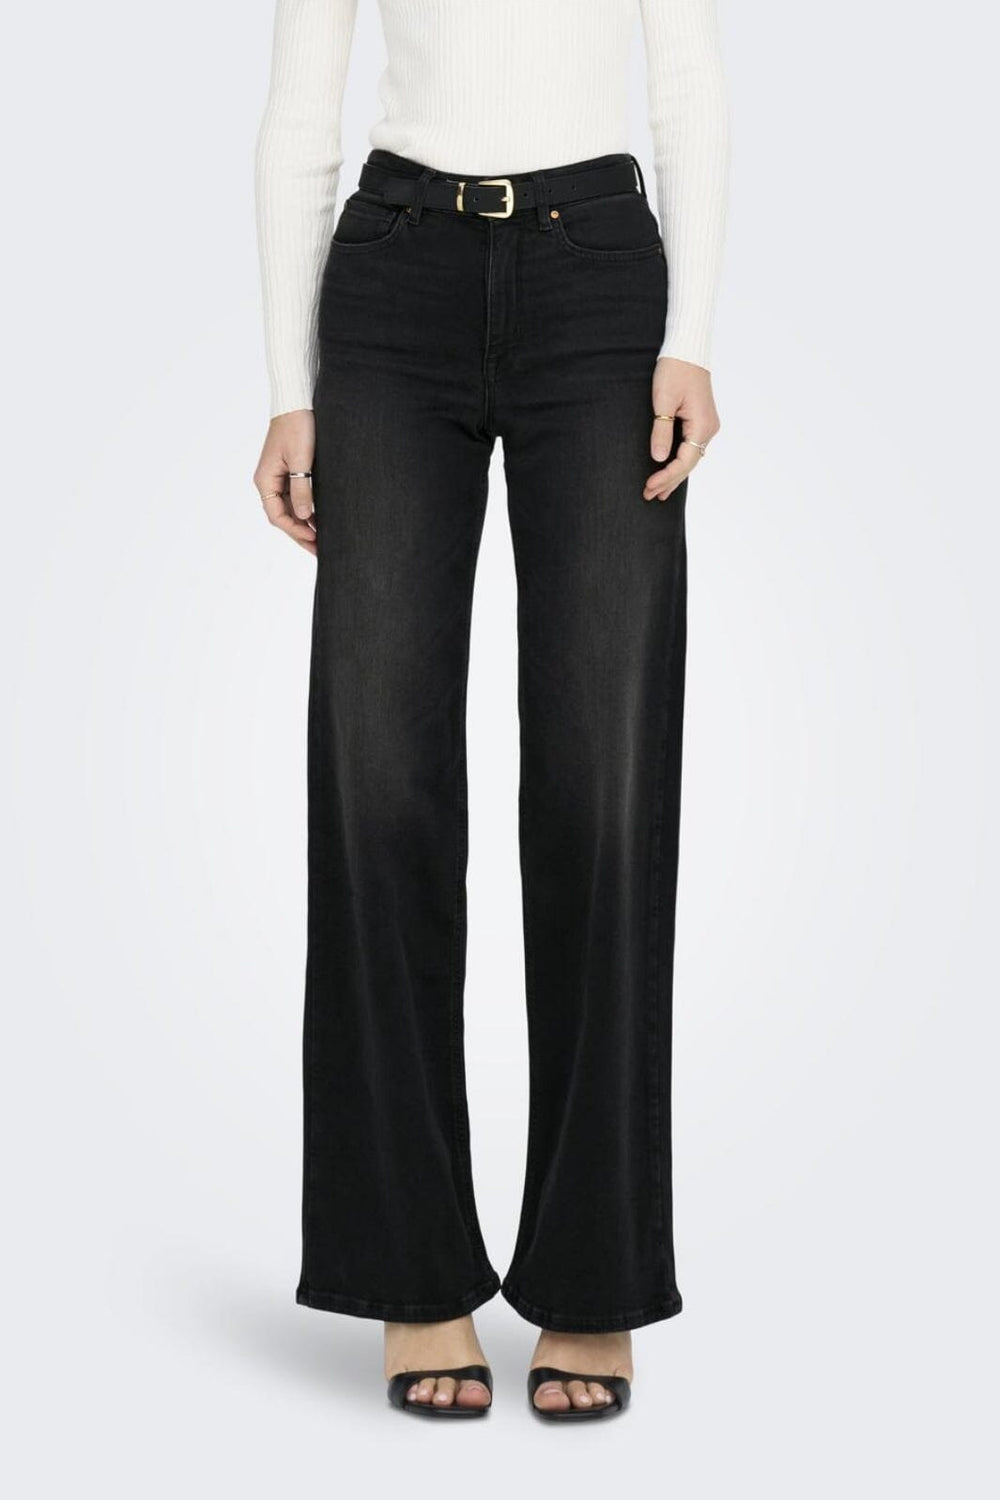 Only - Onlmadison Blush Wide Cro099 - 4283326 Washed Black Jeans 